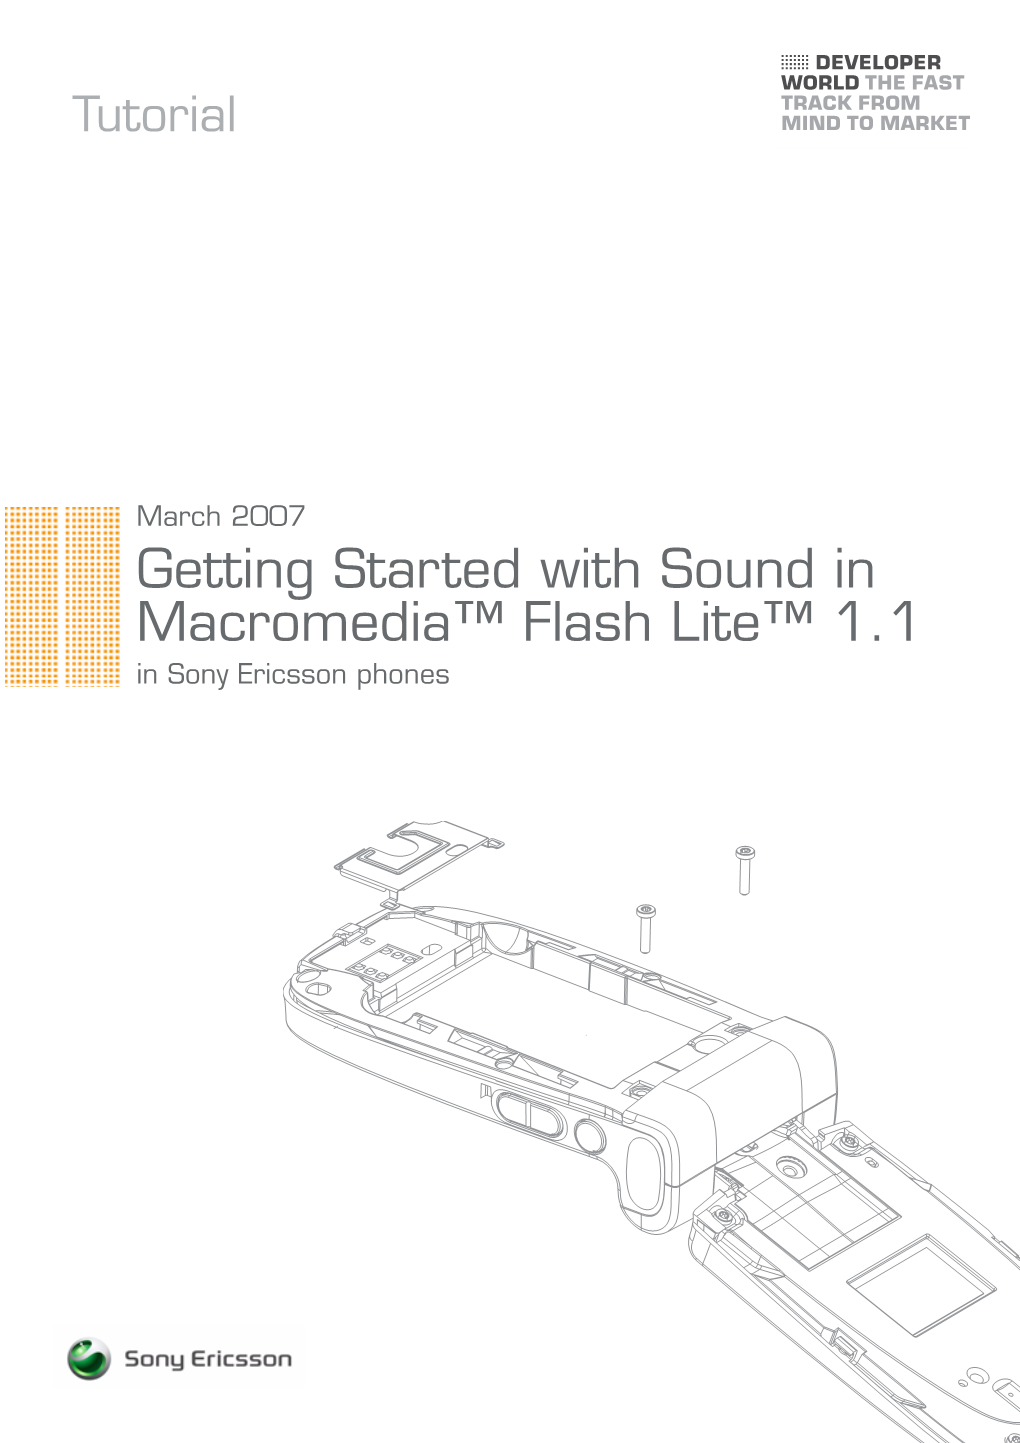 Getting Started with Sound in Macromedia™ Flash Lite™ 1.1 in Sony Ericsson Phones Tutorial | Getting Started with Sound in Macromedia™ Flash Lite™ 1.1